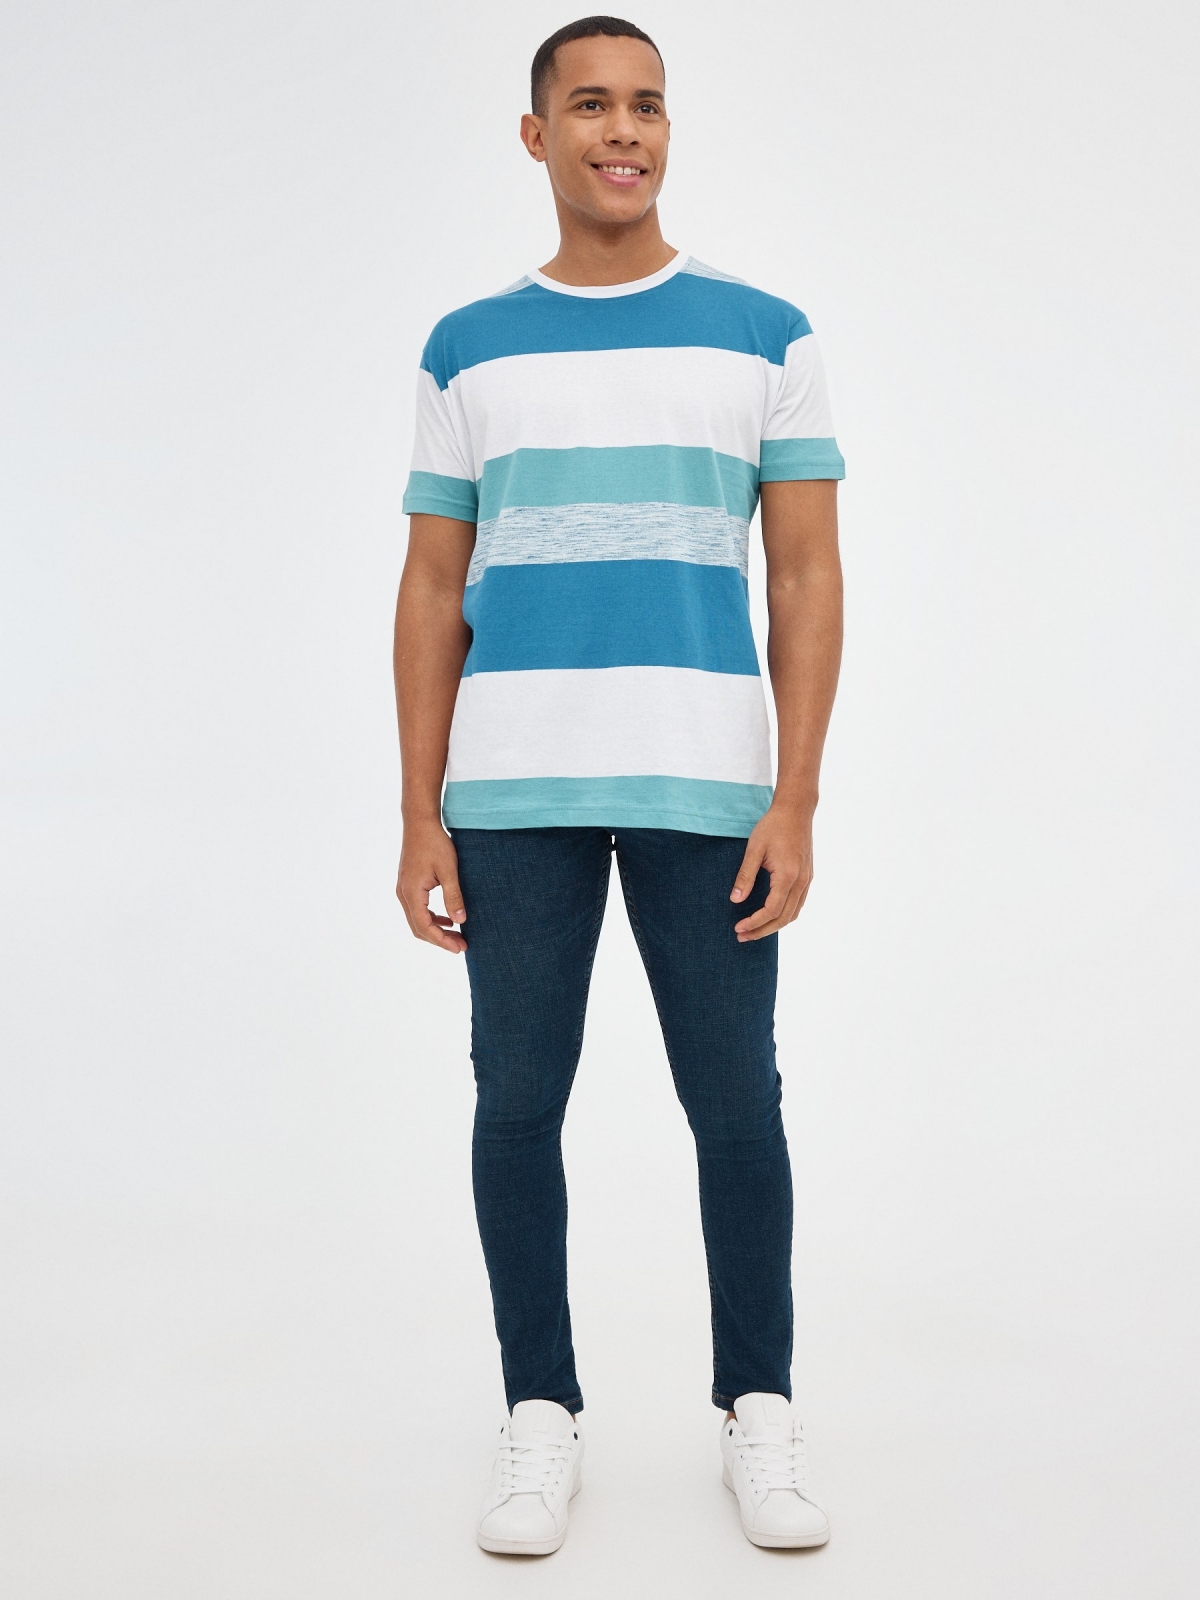 Striped printed T-shirt blue front view